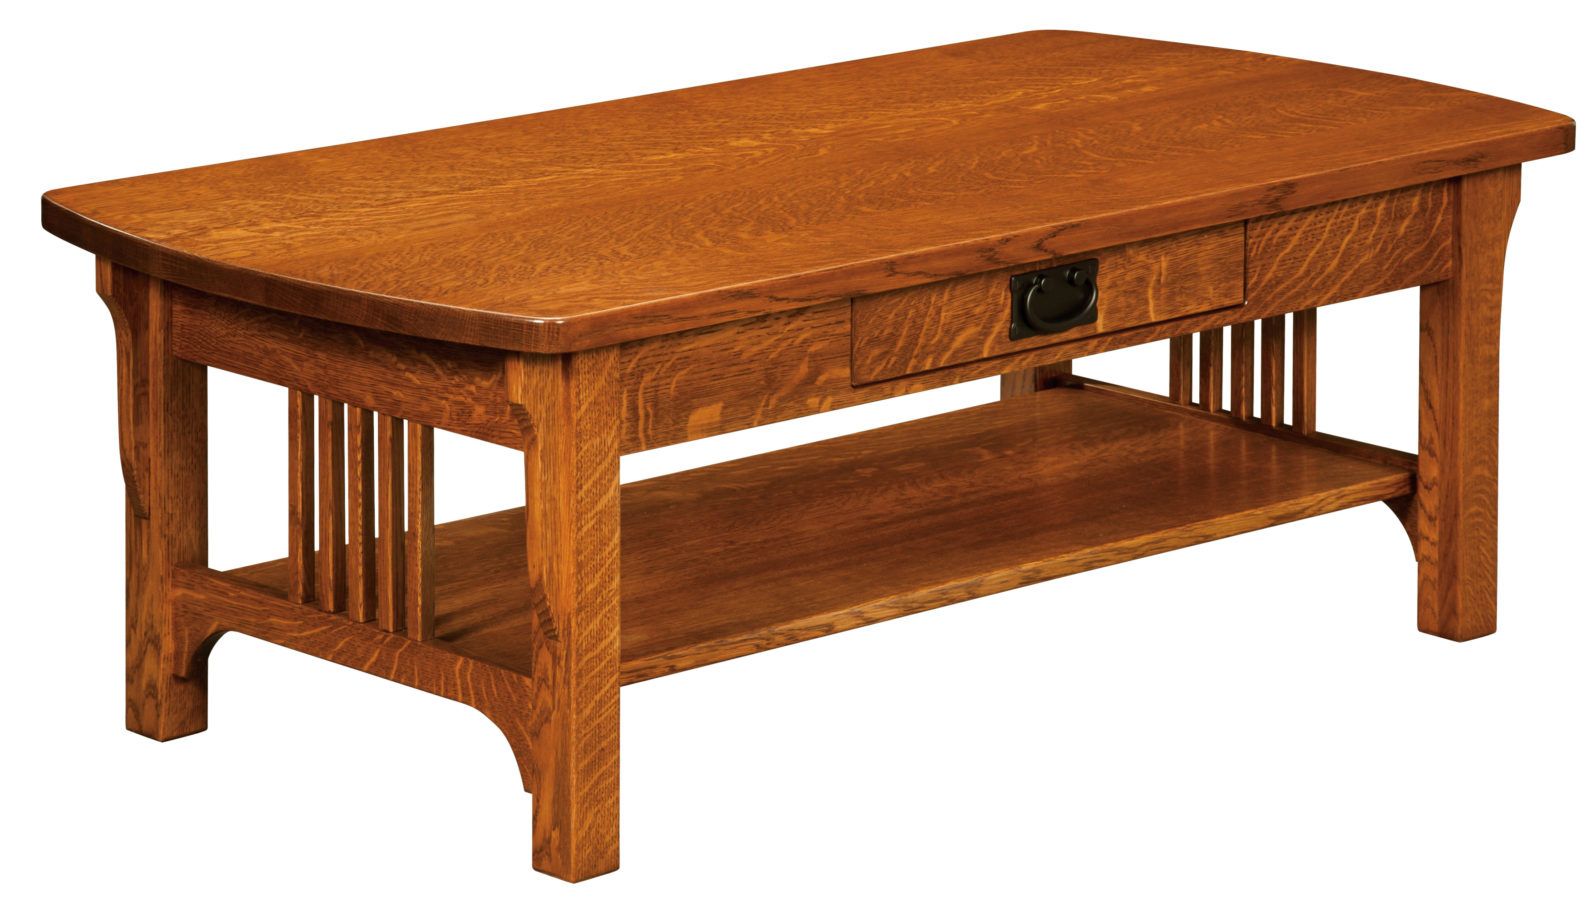 Craftsman Mission Coffee Table | Amish Solid Wood Coffee Tables Intended For Coffee Tables With Solid Legs (Gallery 13 of 20)